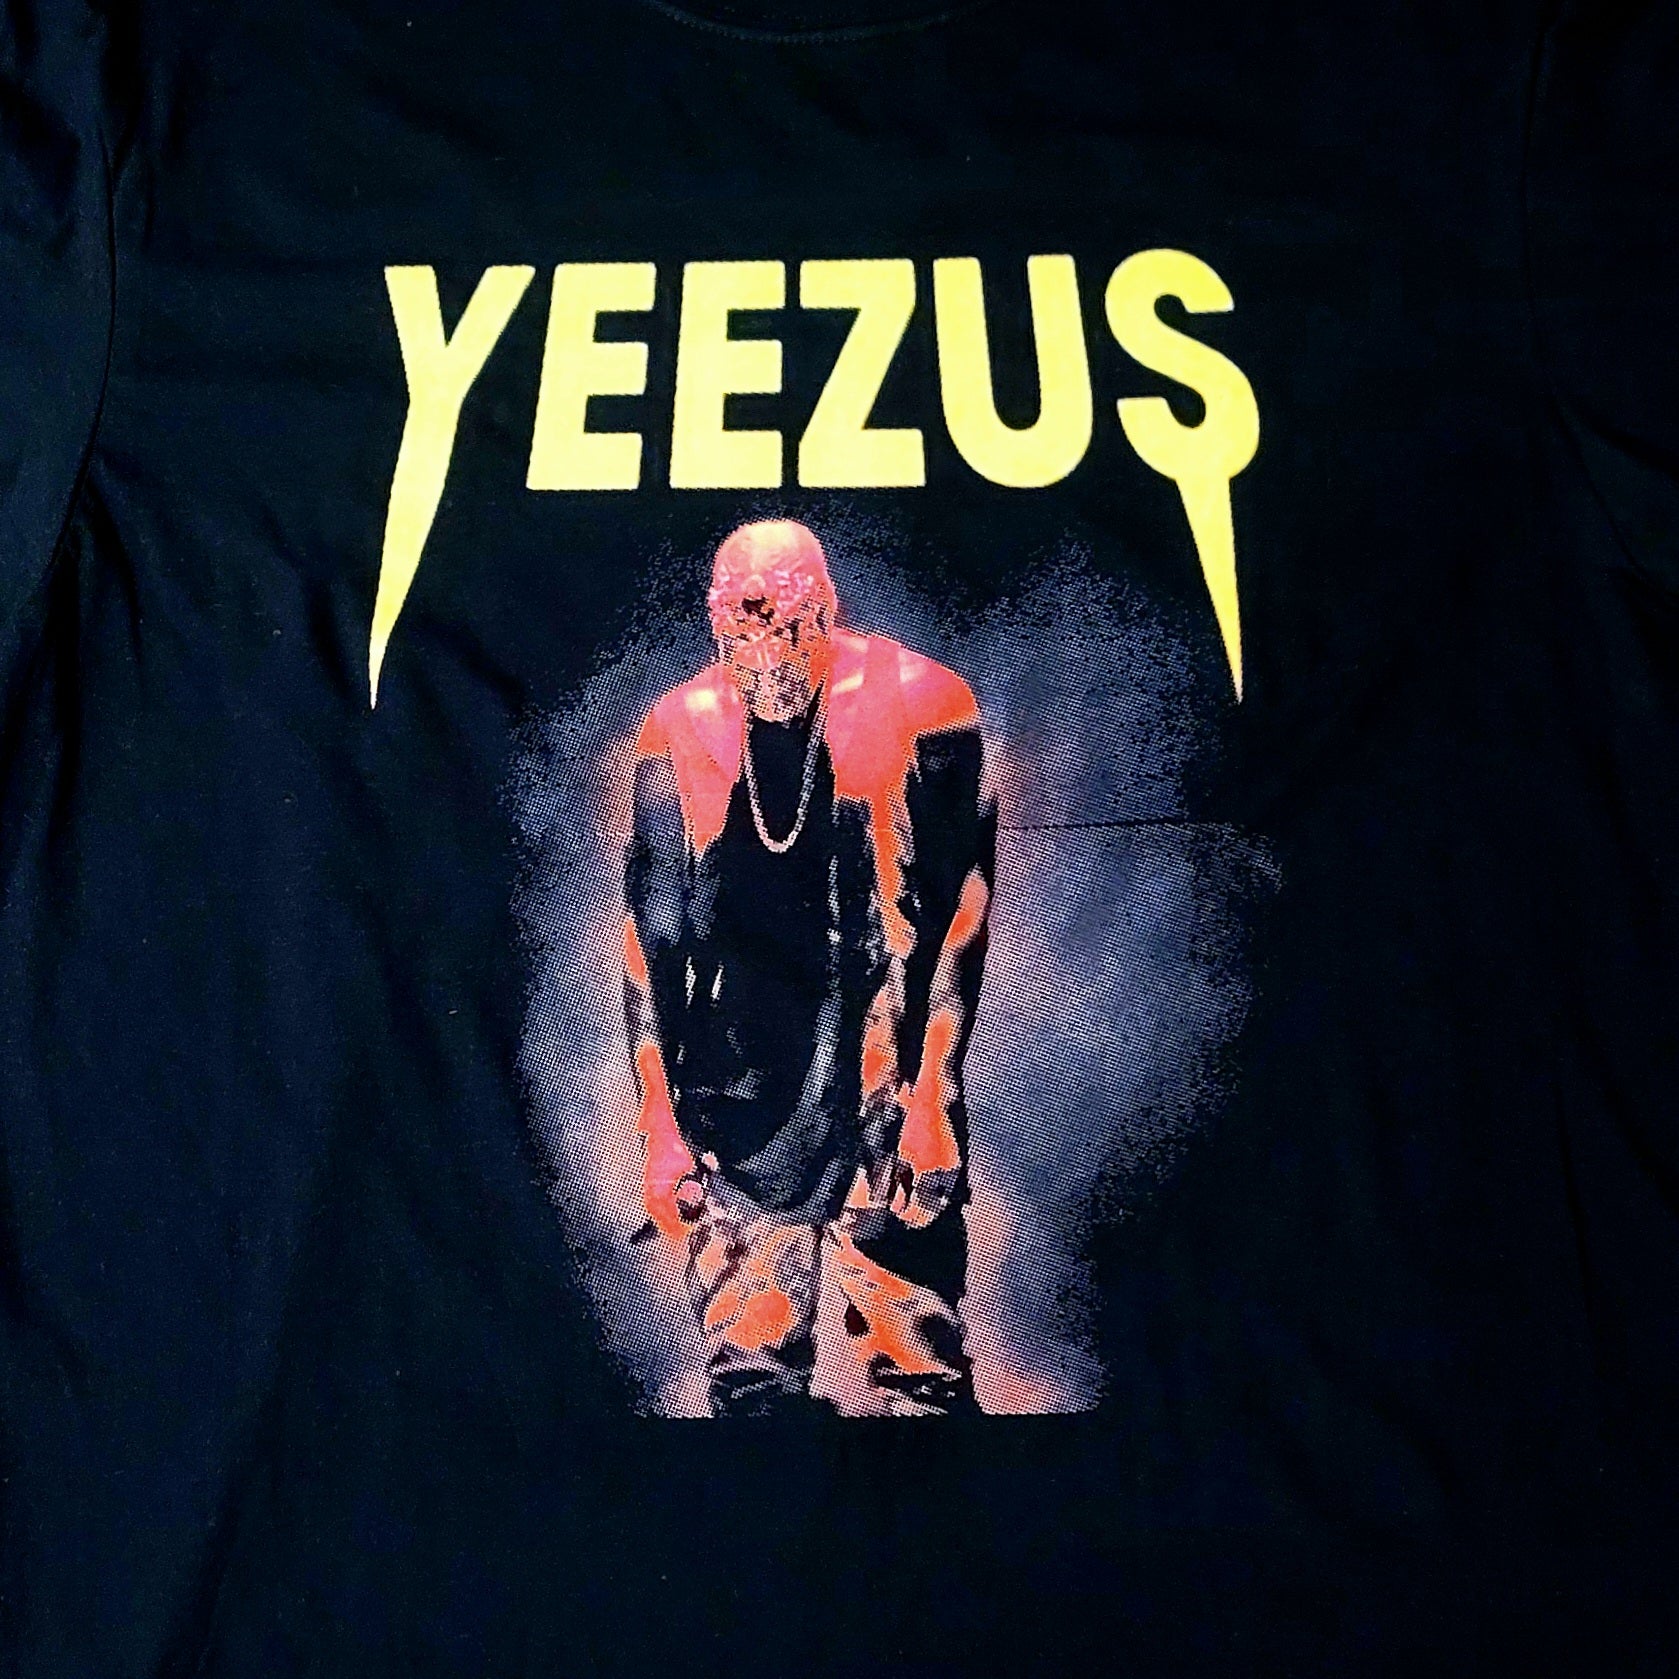 Kanye West Yeezus Tour Gift For Fan T-Shirt